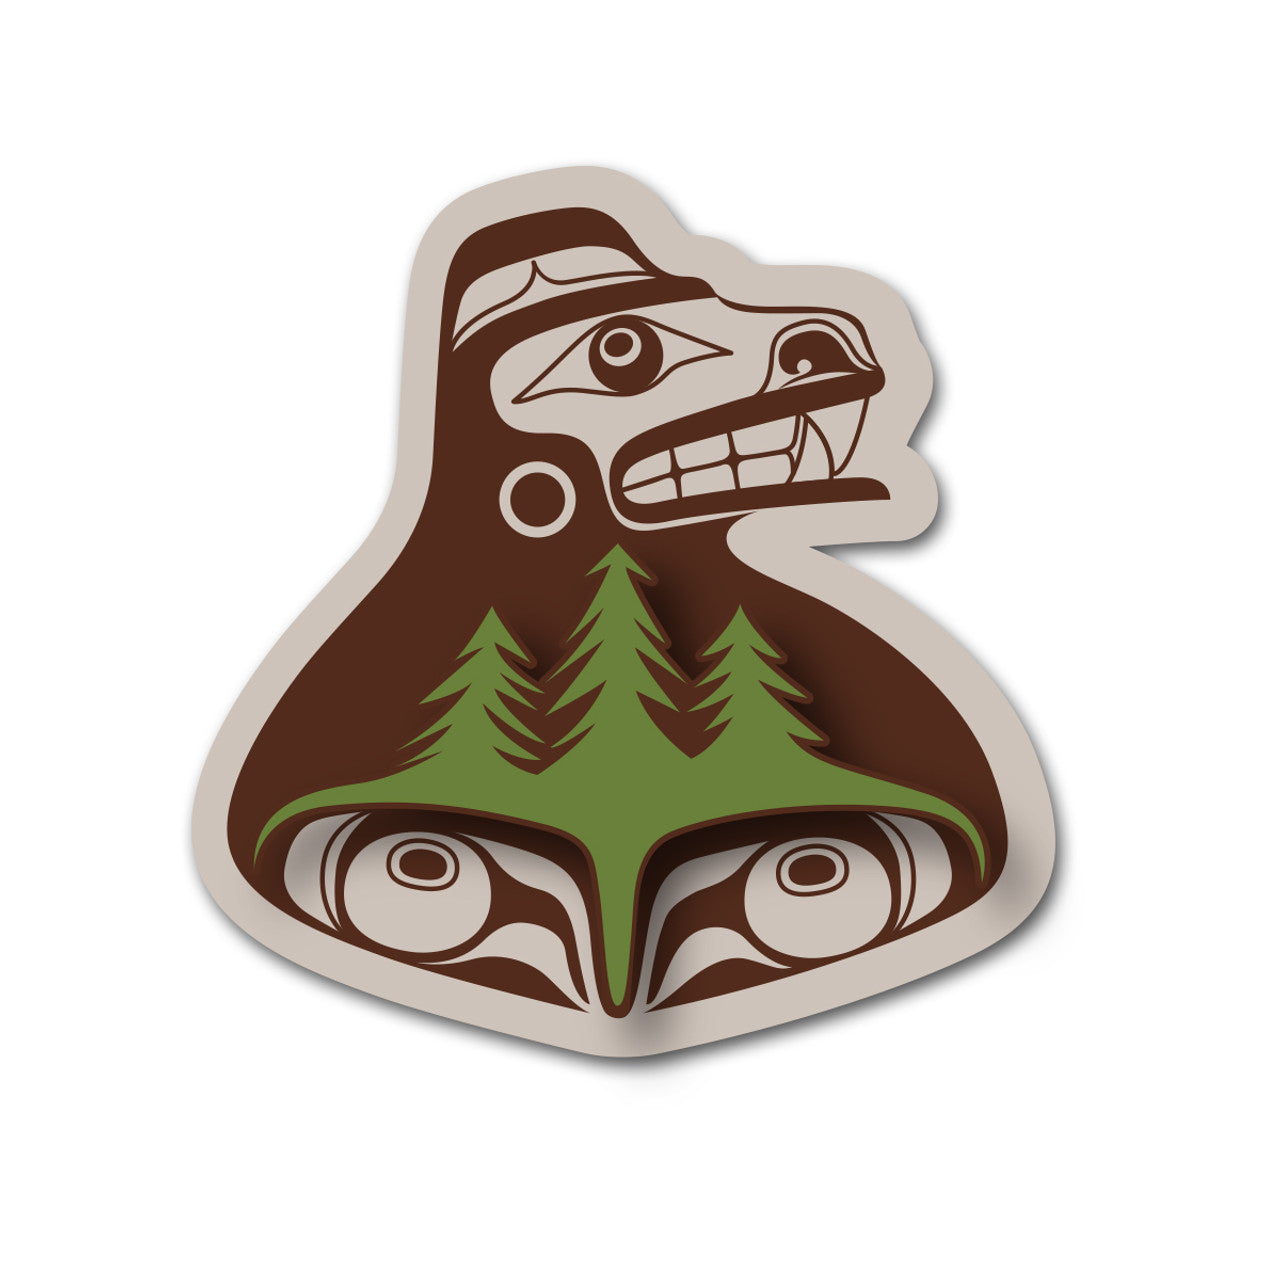 3D MAGNETS - *Allan Weir Bear The Tree Hugger - M371 DISCONTINUE - House of Himwitsa Native Art Gallery and Gifts